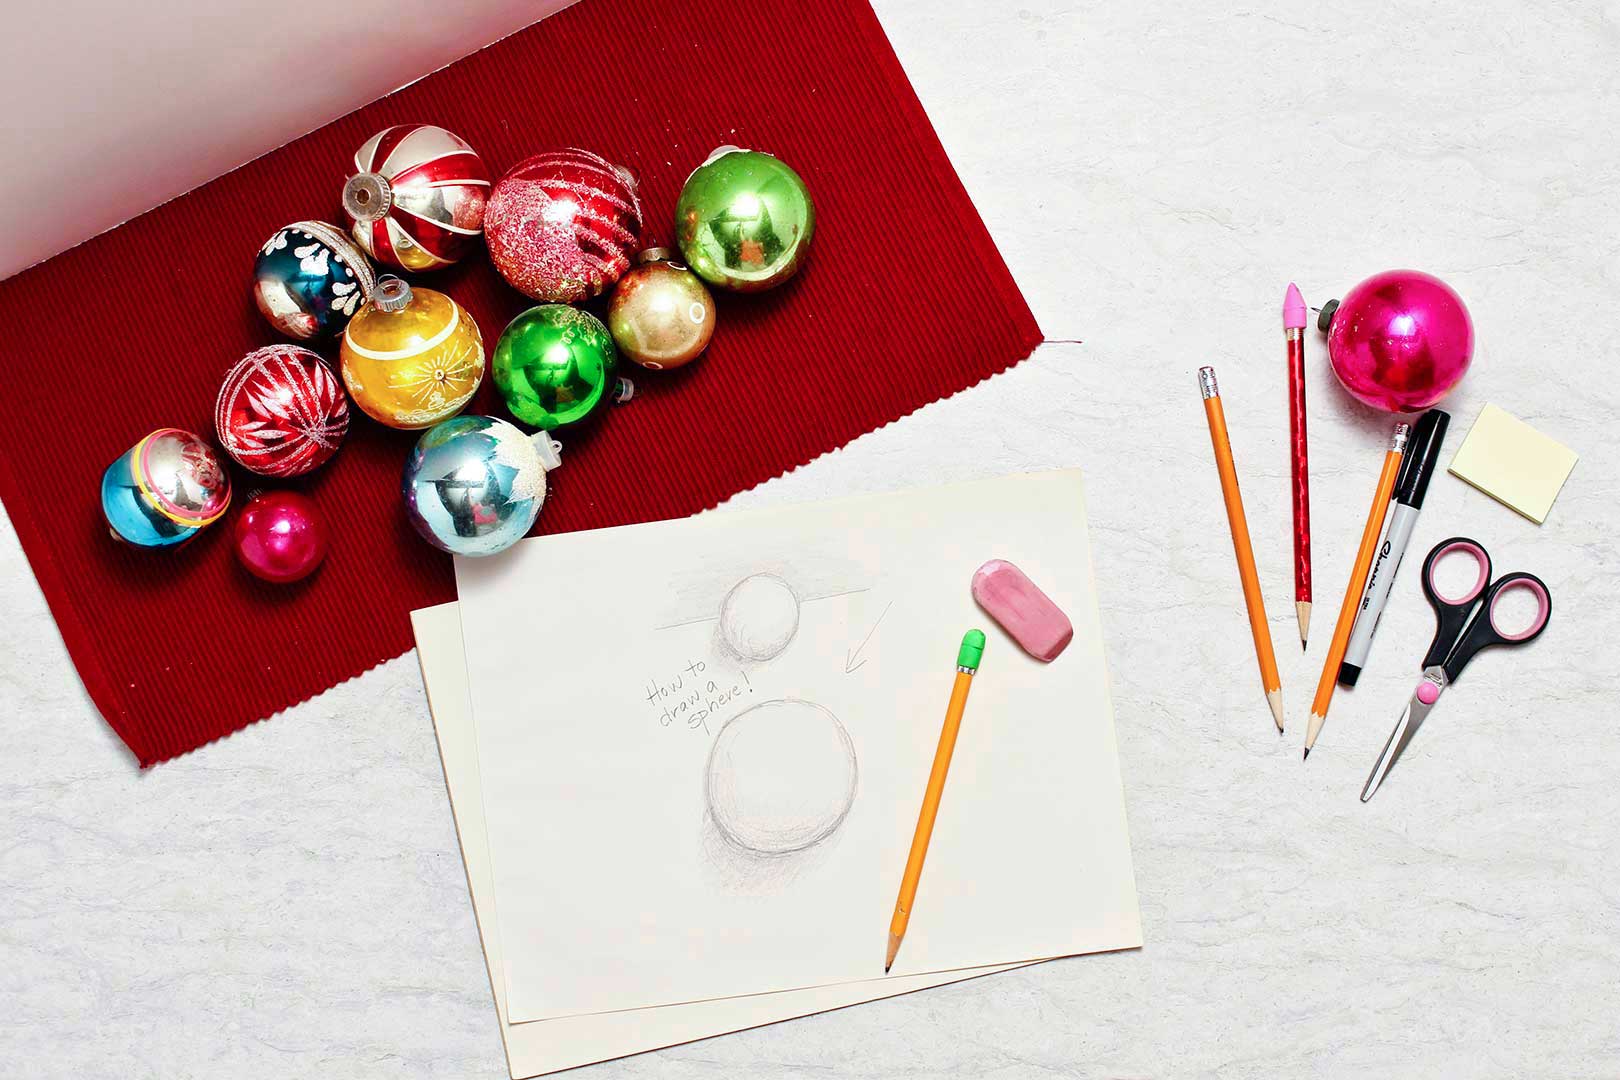 Christmas ornaments lay on a red placemat and a drawing of two spheres rests near by with a pencil and eraser on top of it.